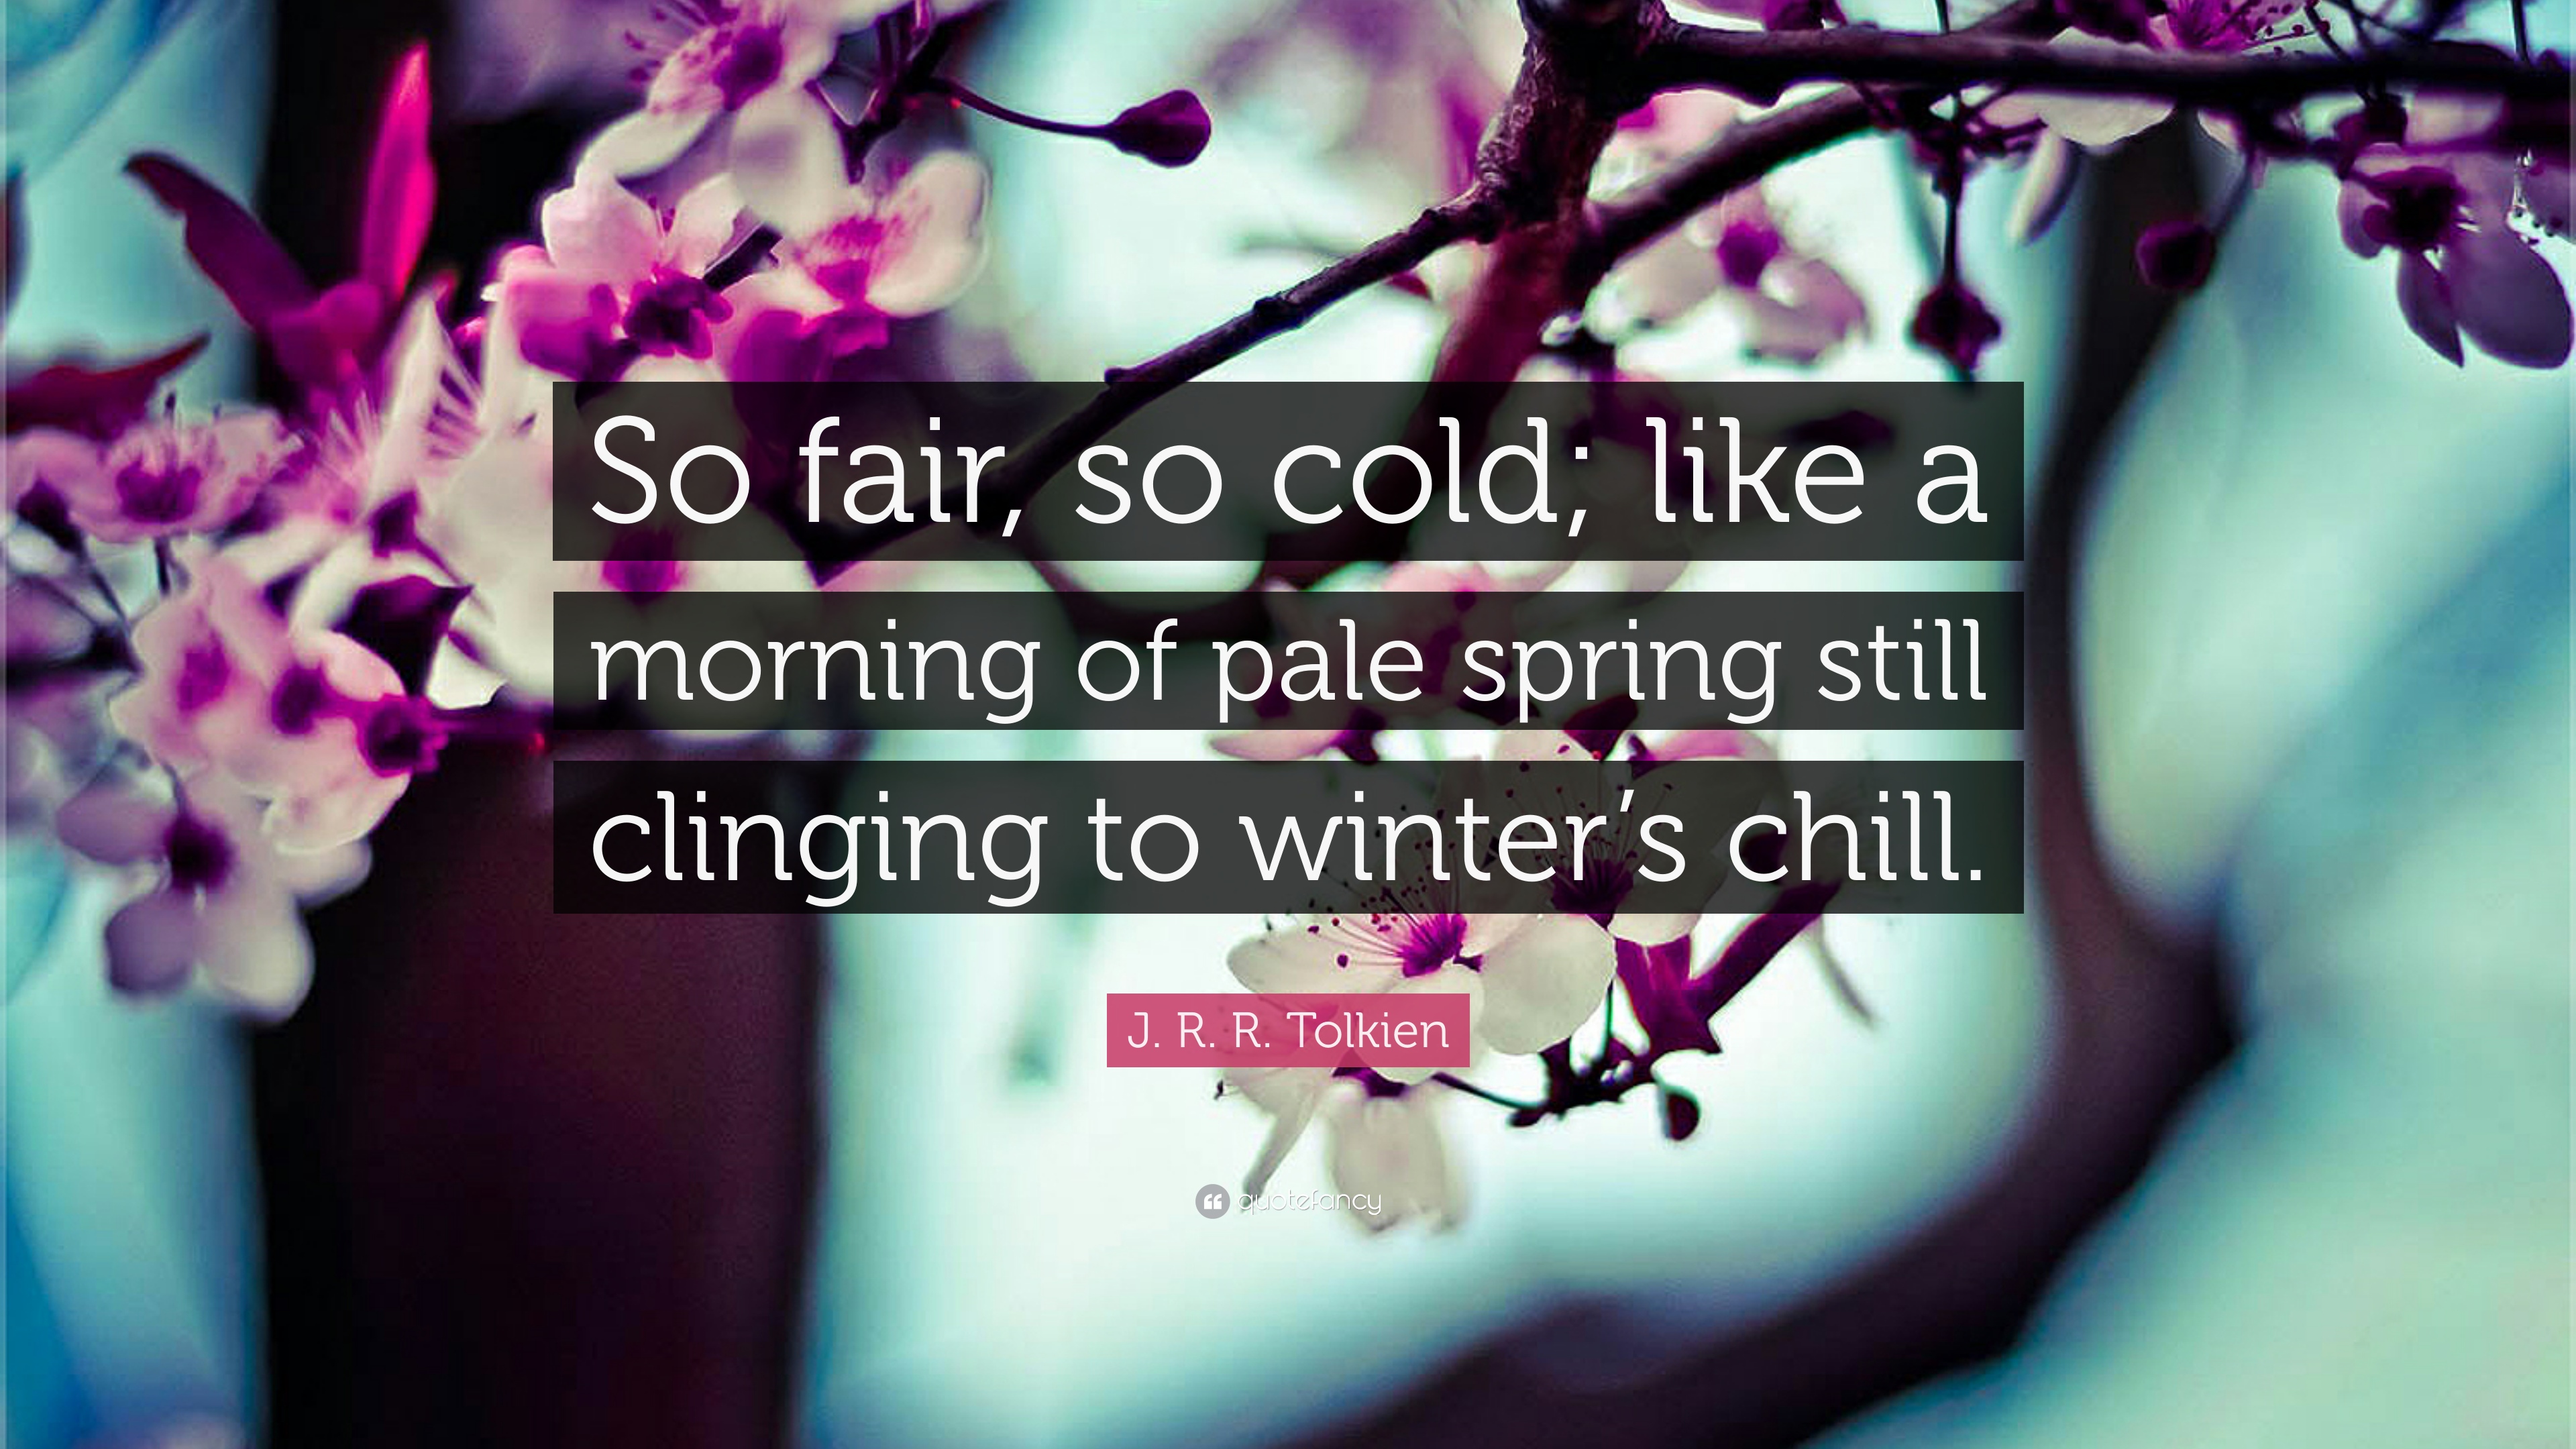 J. R. R. Tolkien Quote: “So fair, so cold; like a morning of pale